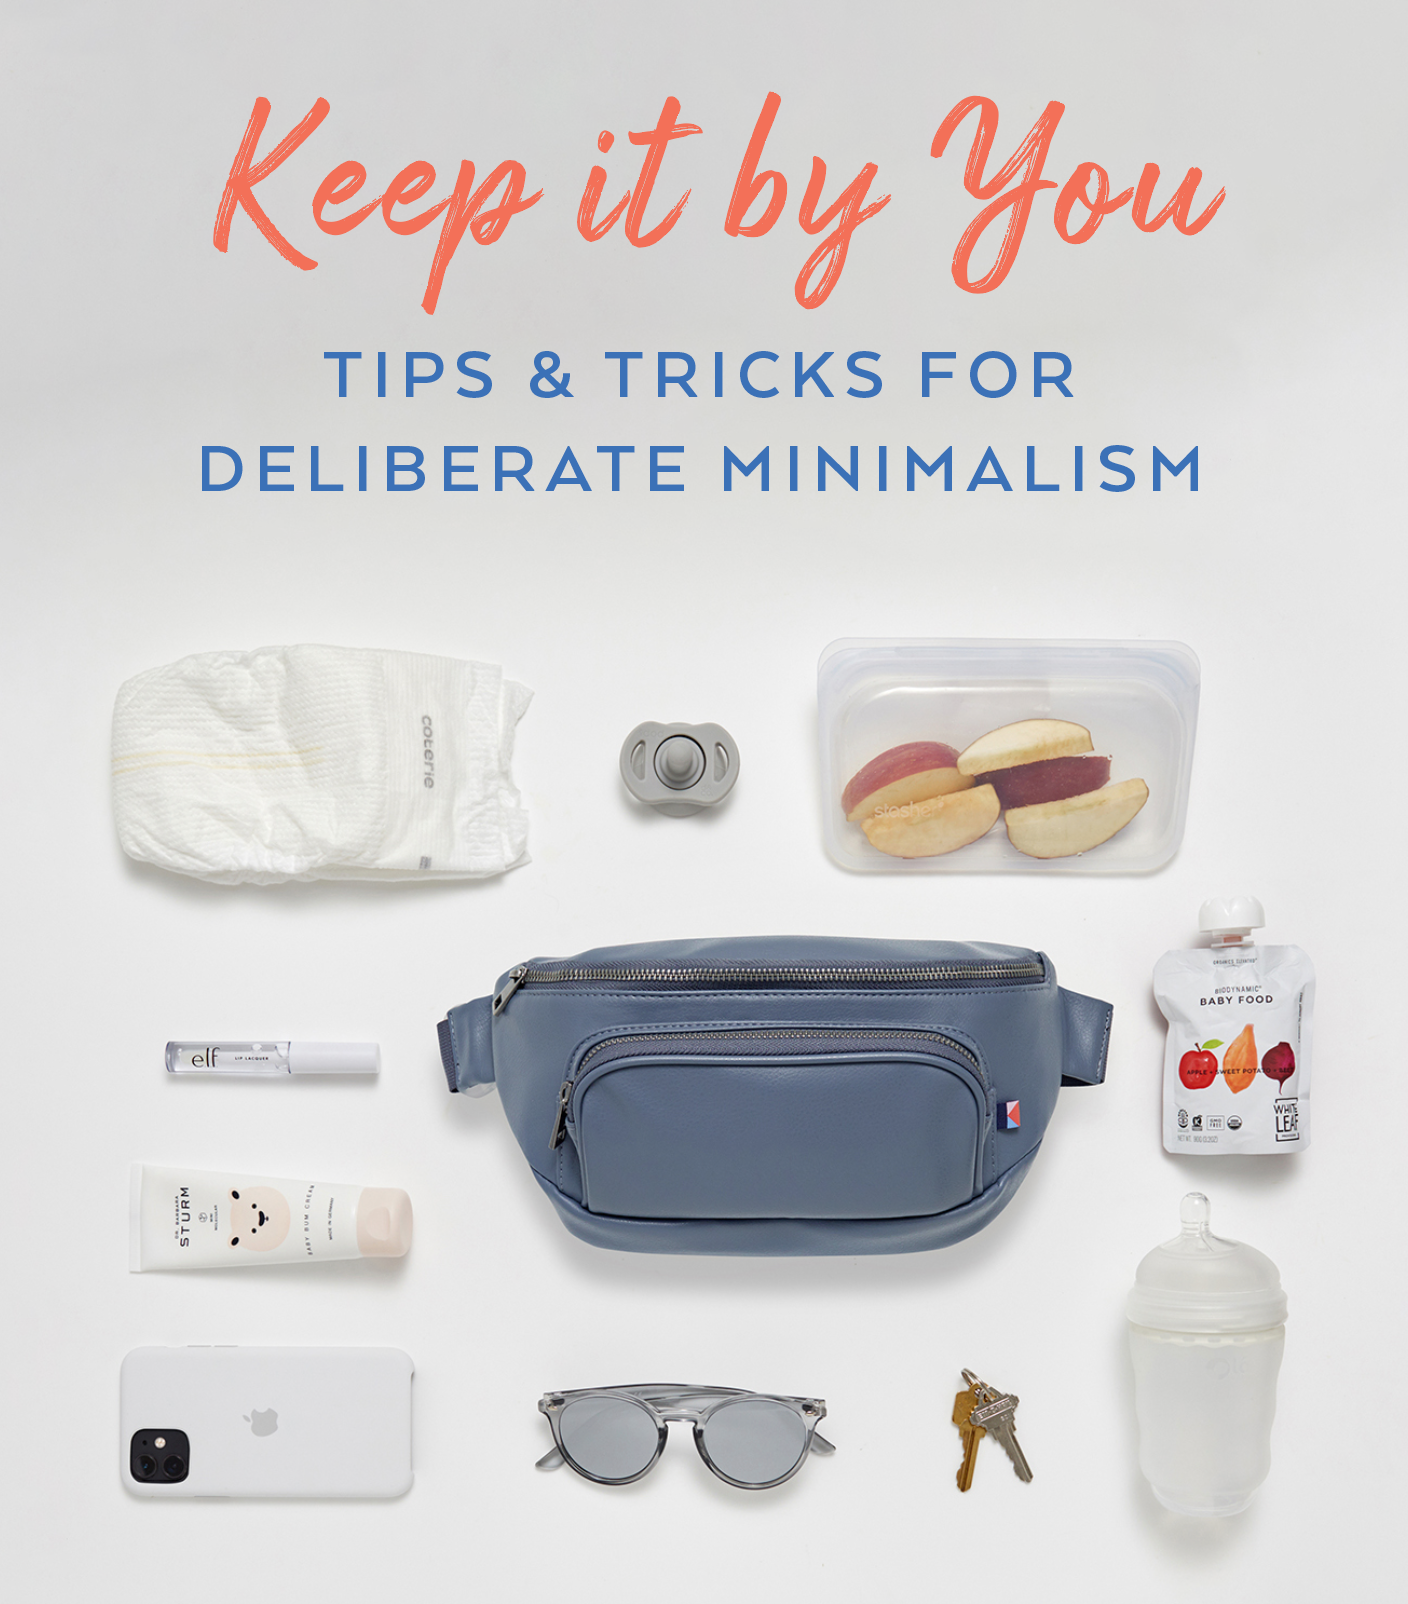 Keep It By You Series: Tips & Tricks for deliberate minimalism